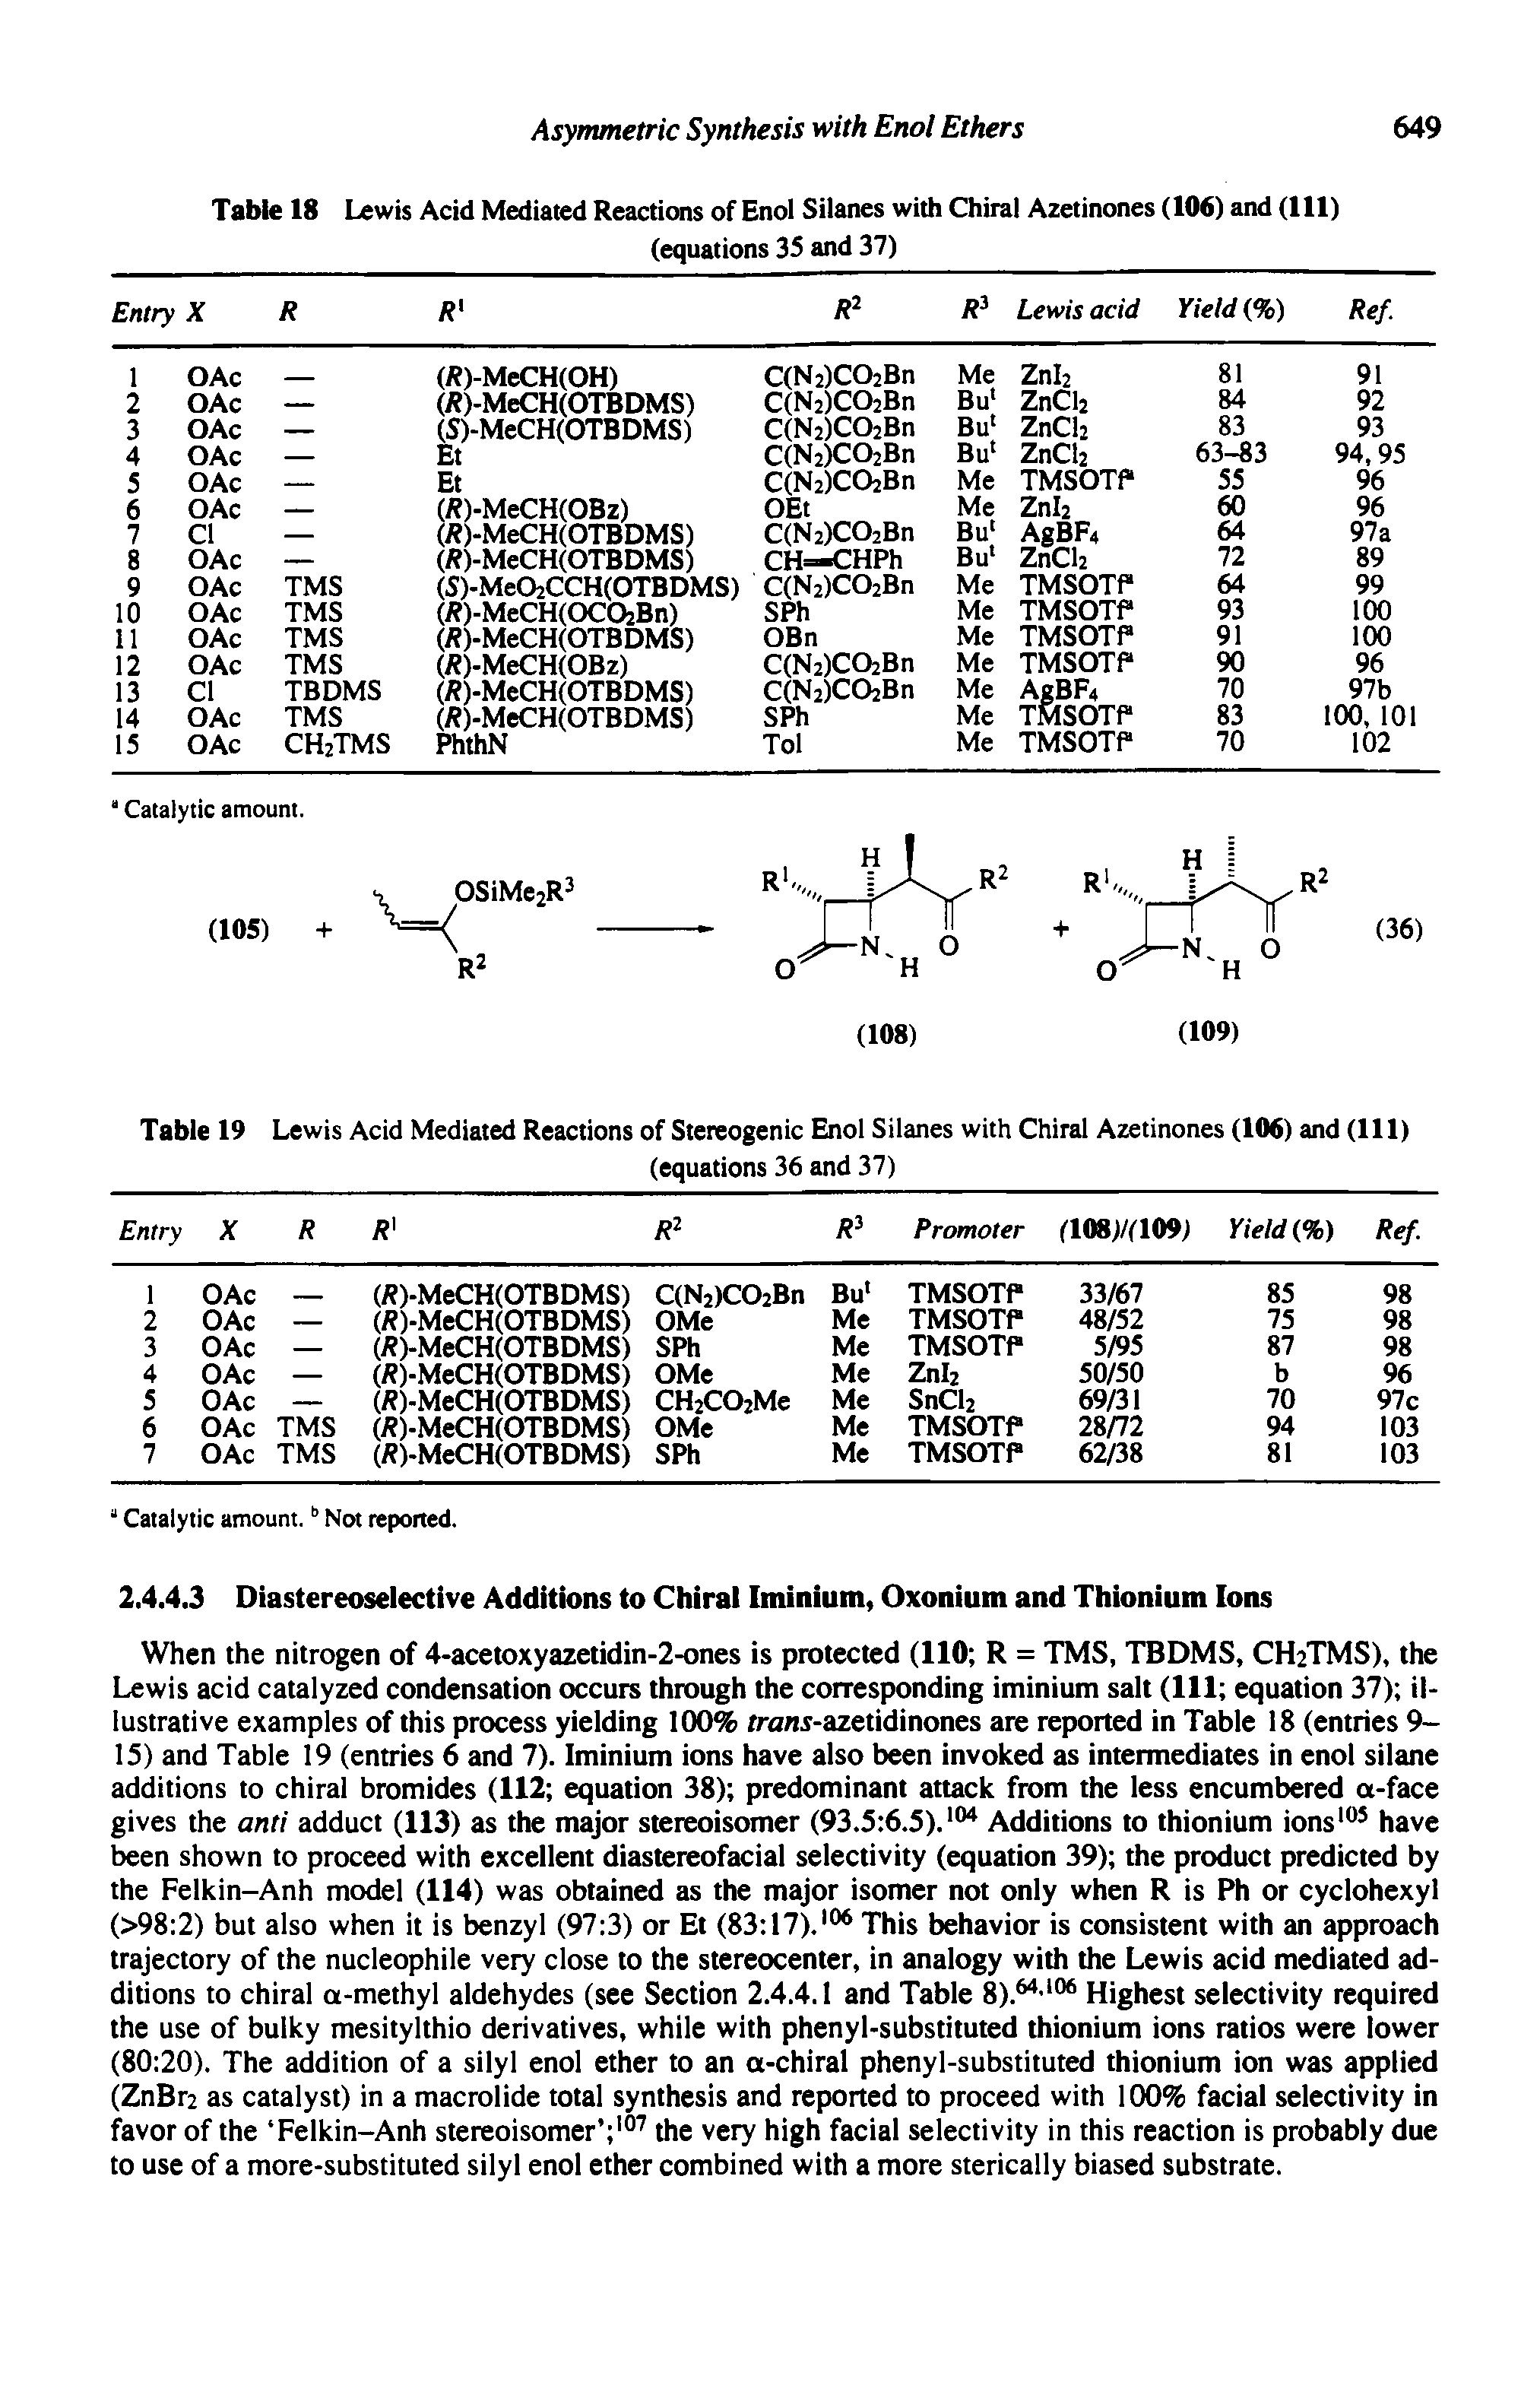 Table 18 Lewis Acid Mediated Reactions of Enol Silanes with Chiral Azetinones (106) and (111)...